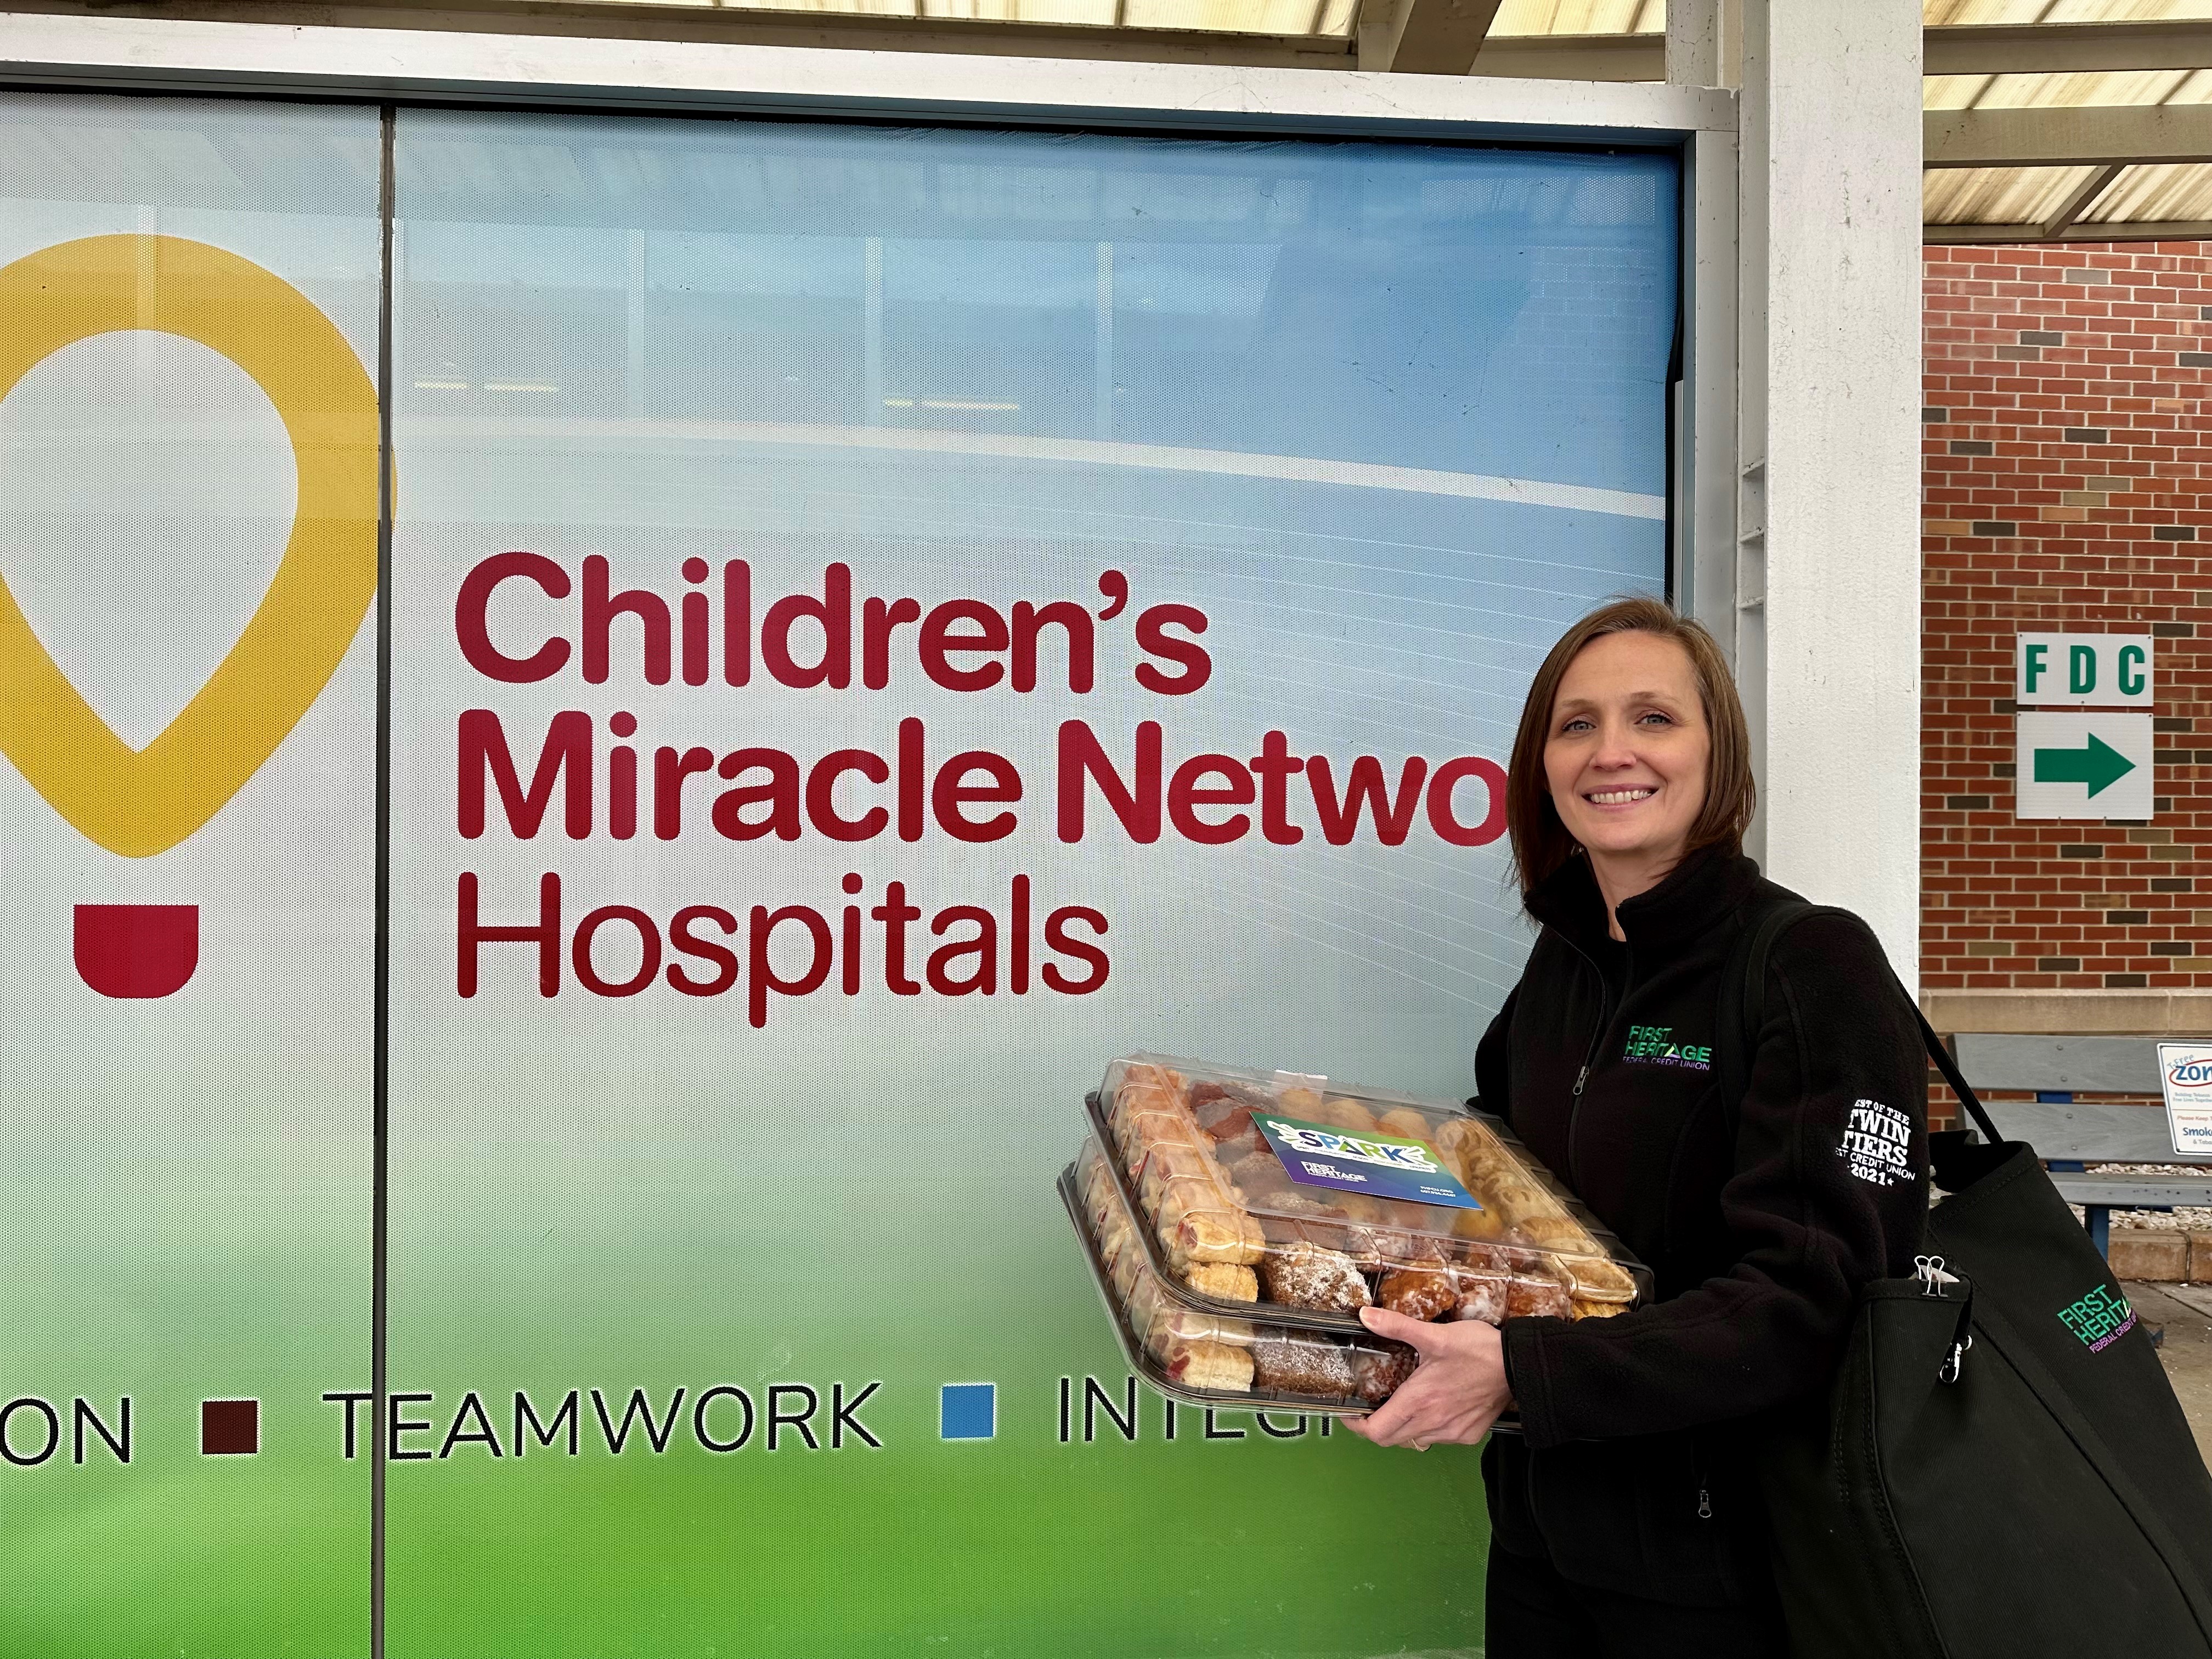 Christy in front of Children's Miracle Network sign